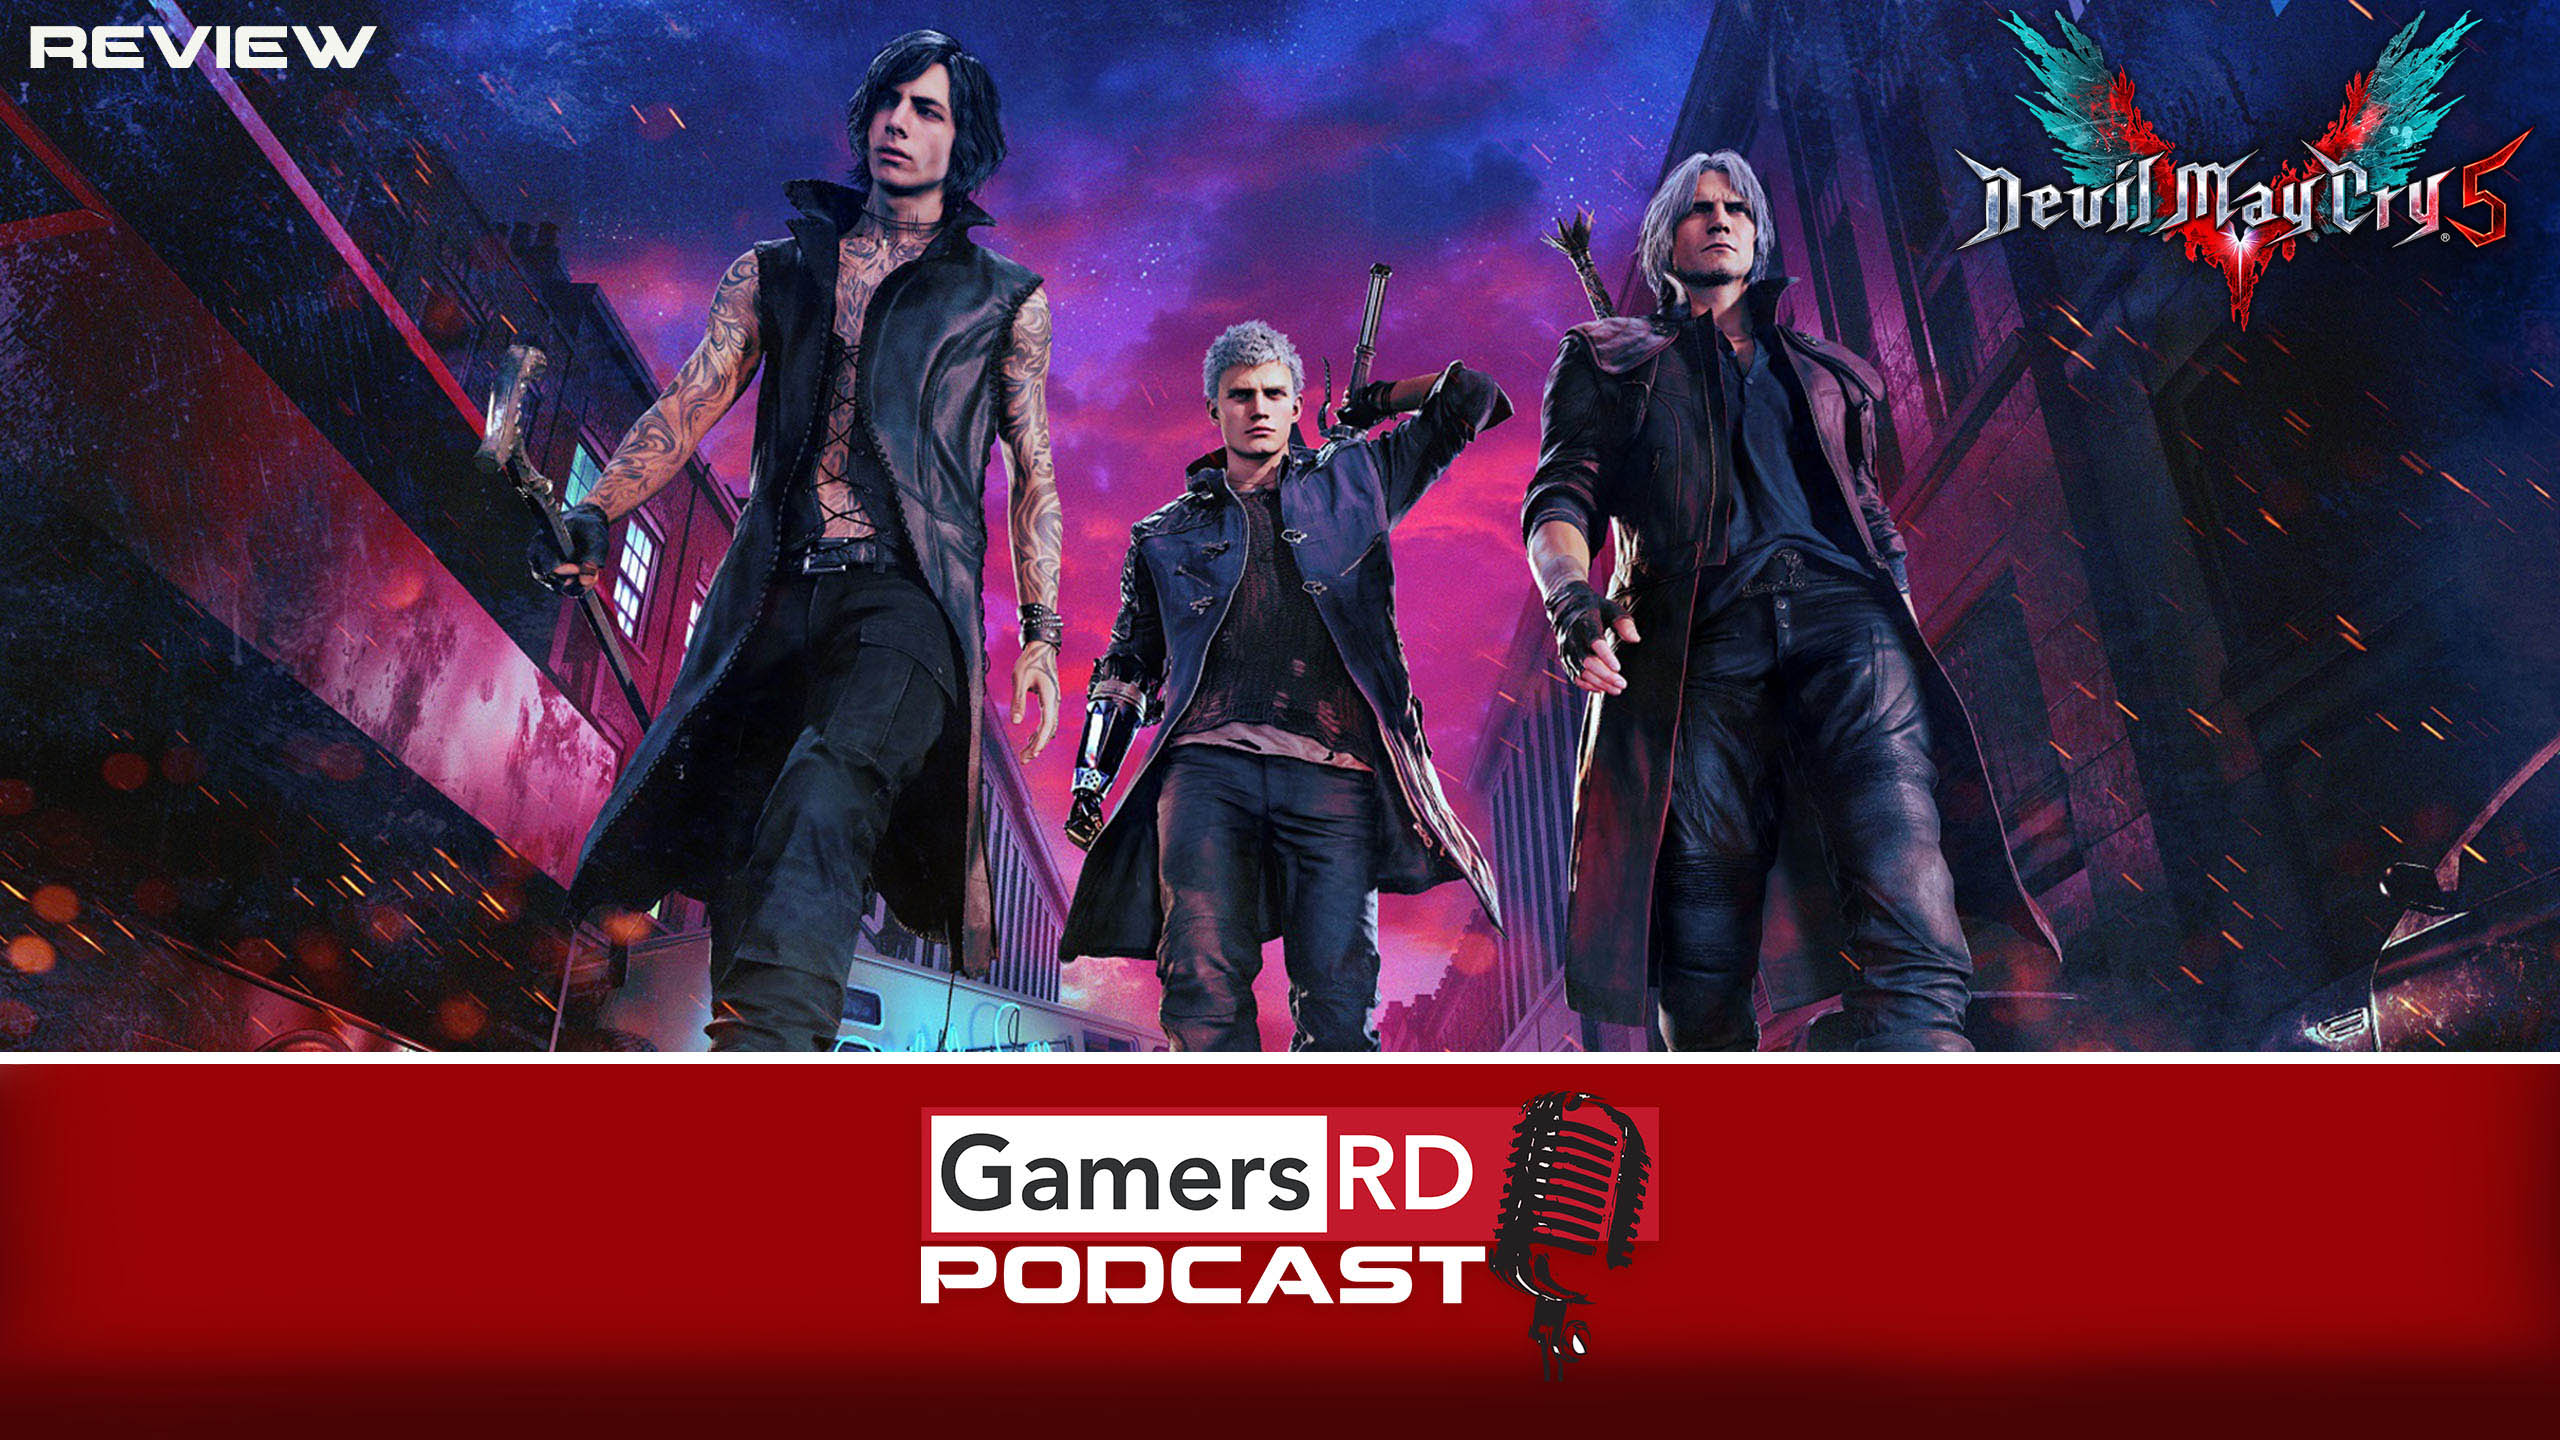 Devil May Cry 5 Review, GamersRD Podcast #58, Capcom, PS4, PC, Xbox One,Dante